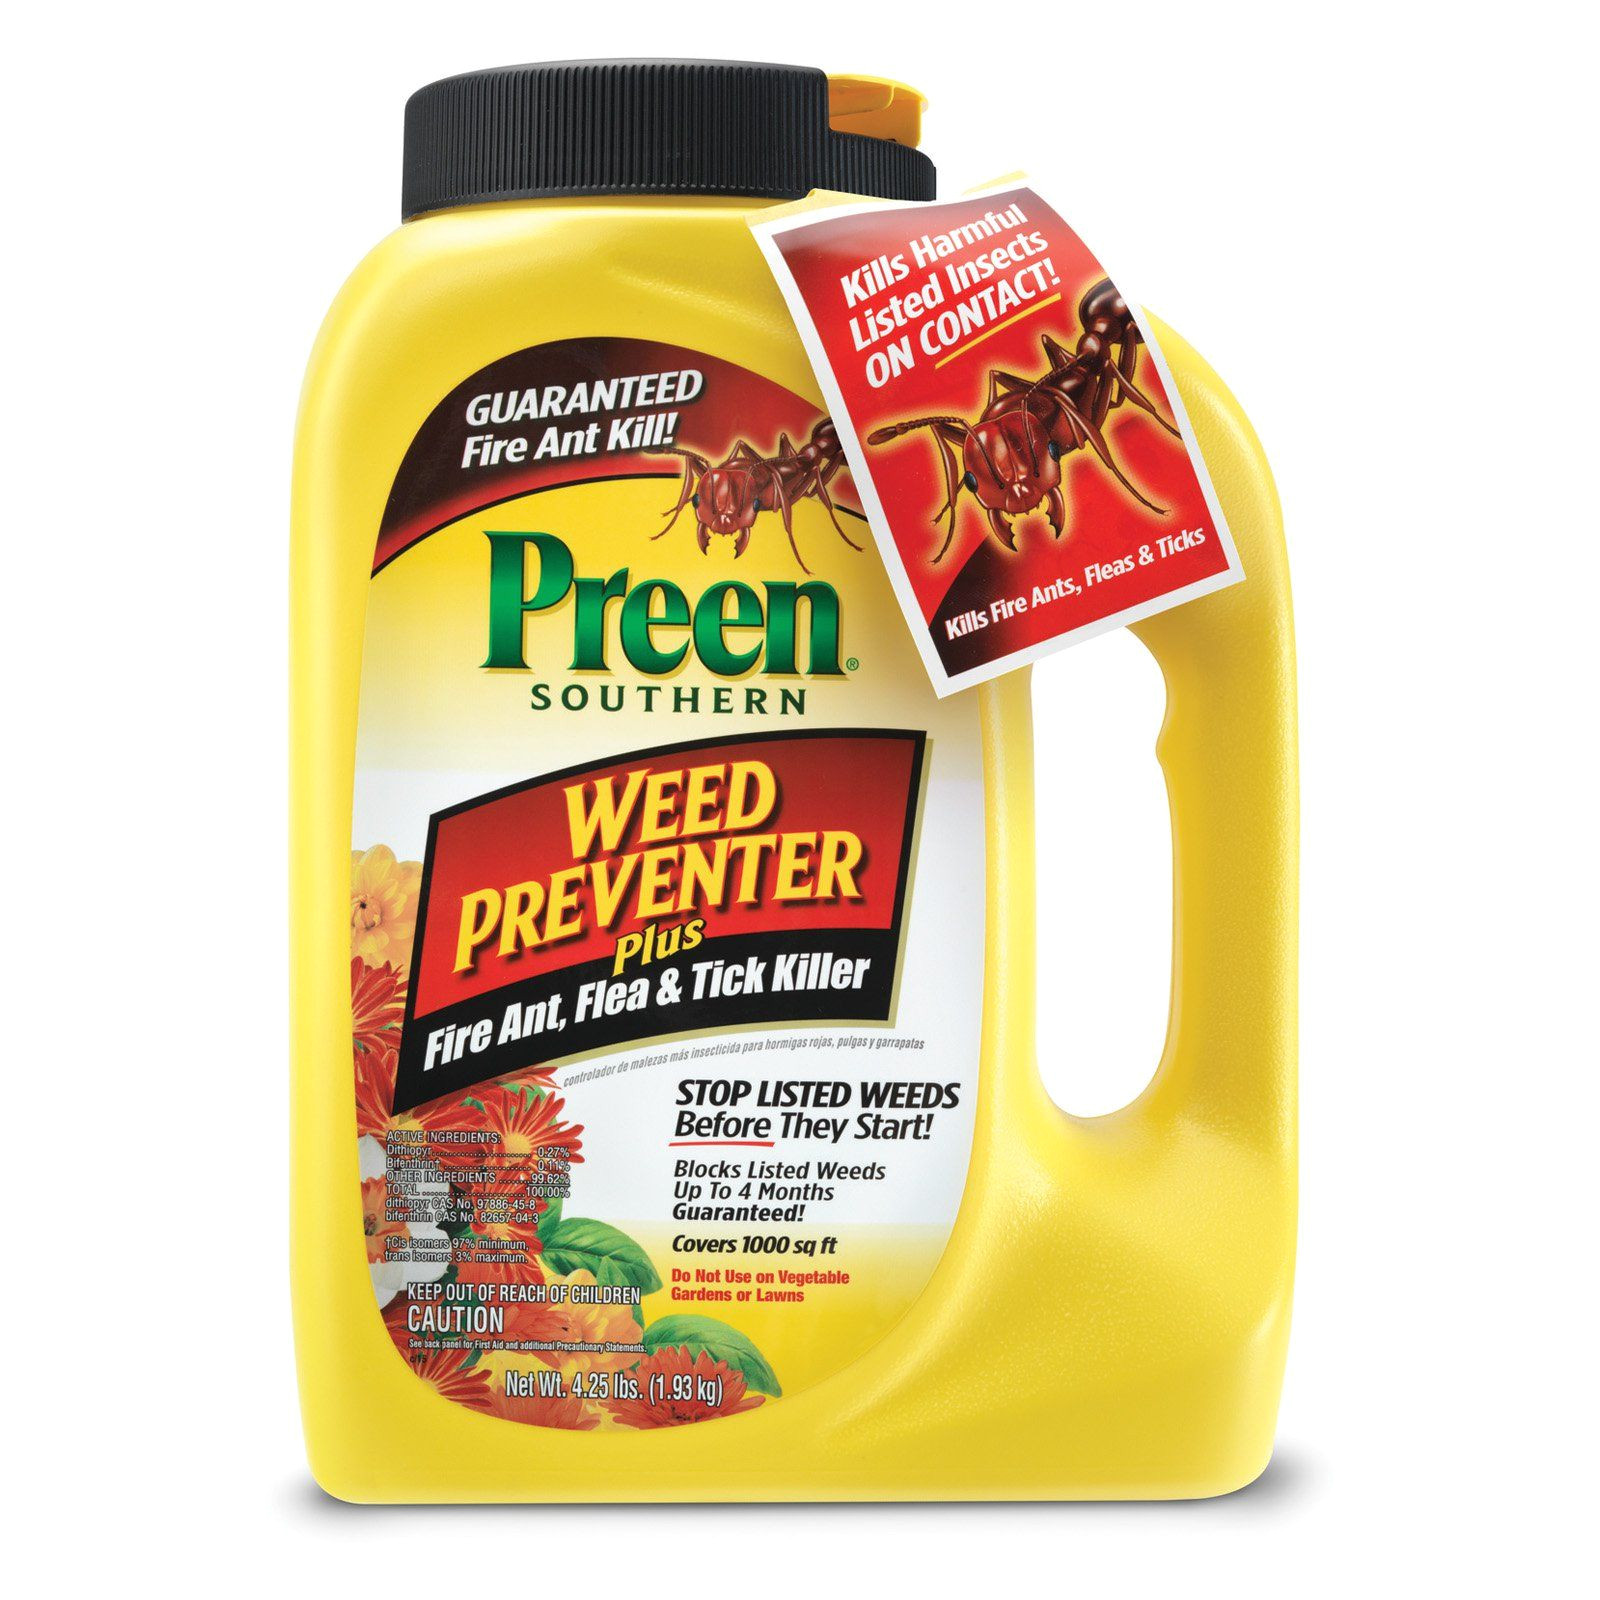 preen southern garden weed preventer plus fire ant flea and tick killer g81 2464033x